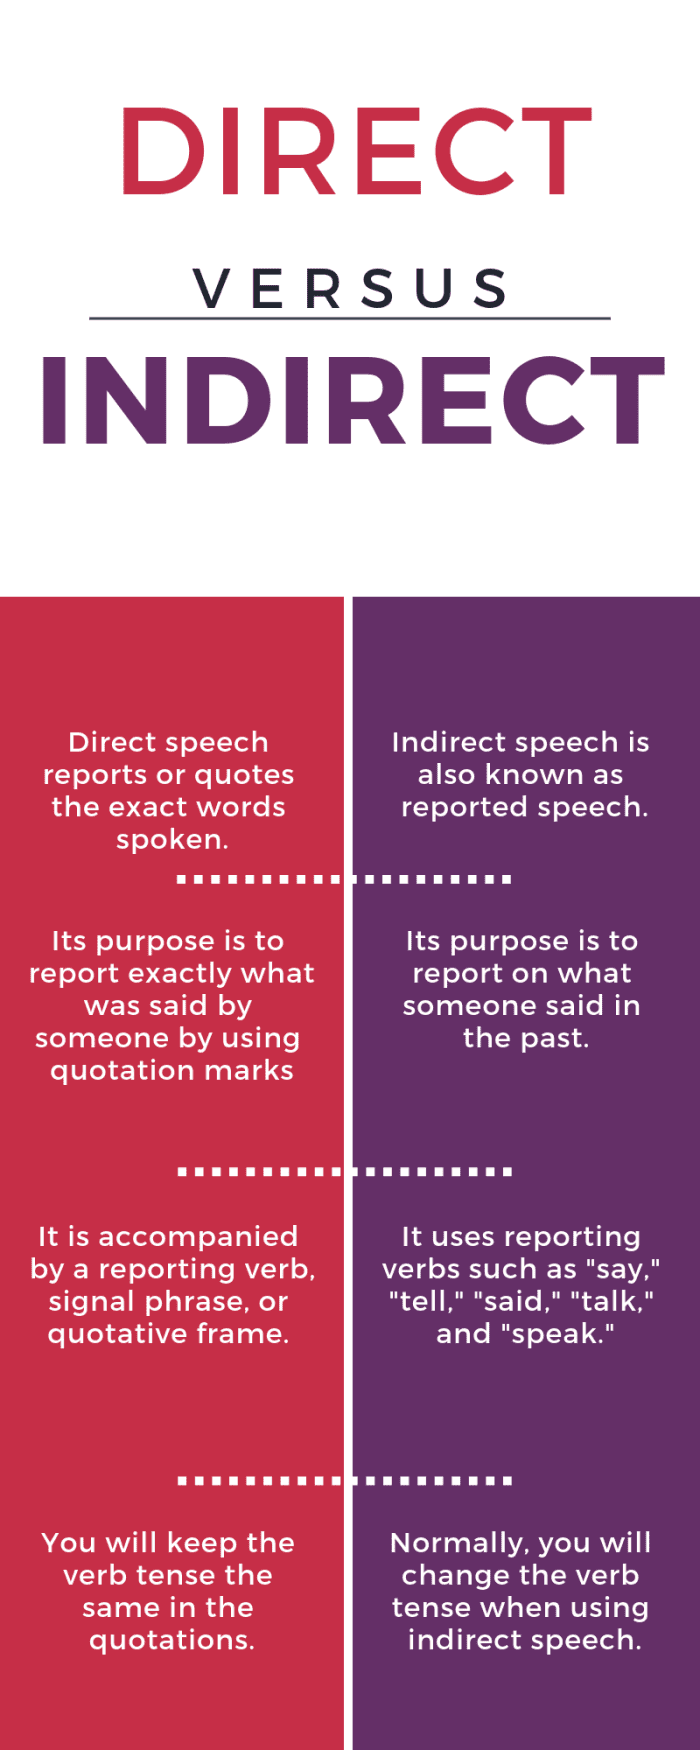 Direct vs. indirect speech: the key differences defined